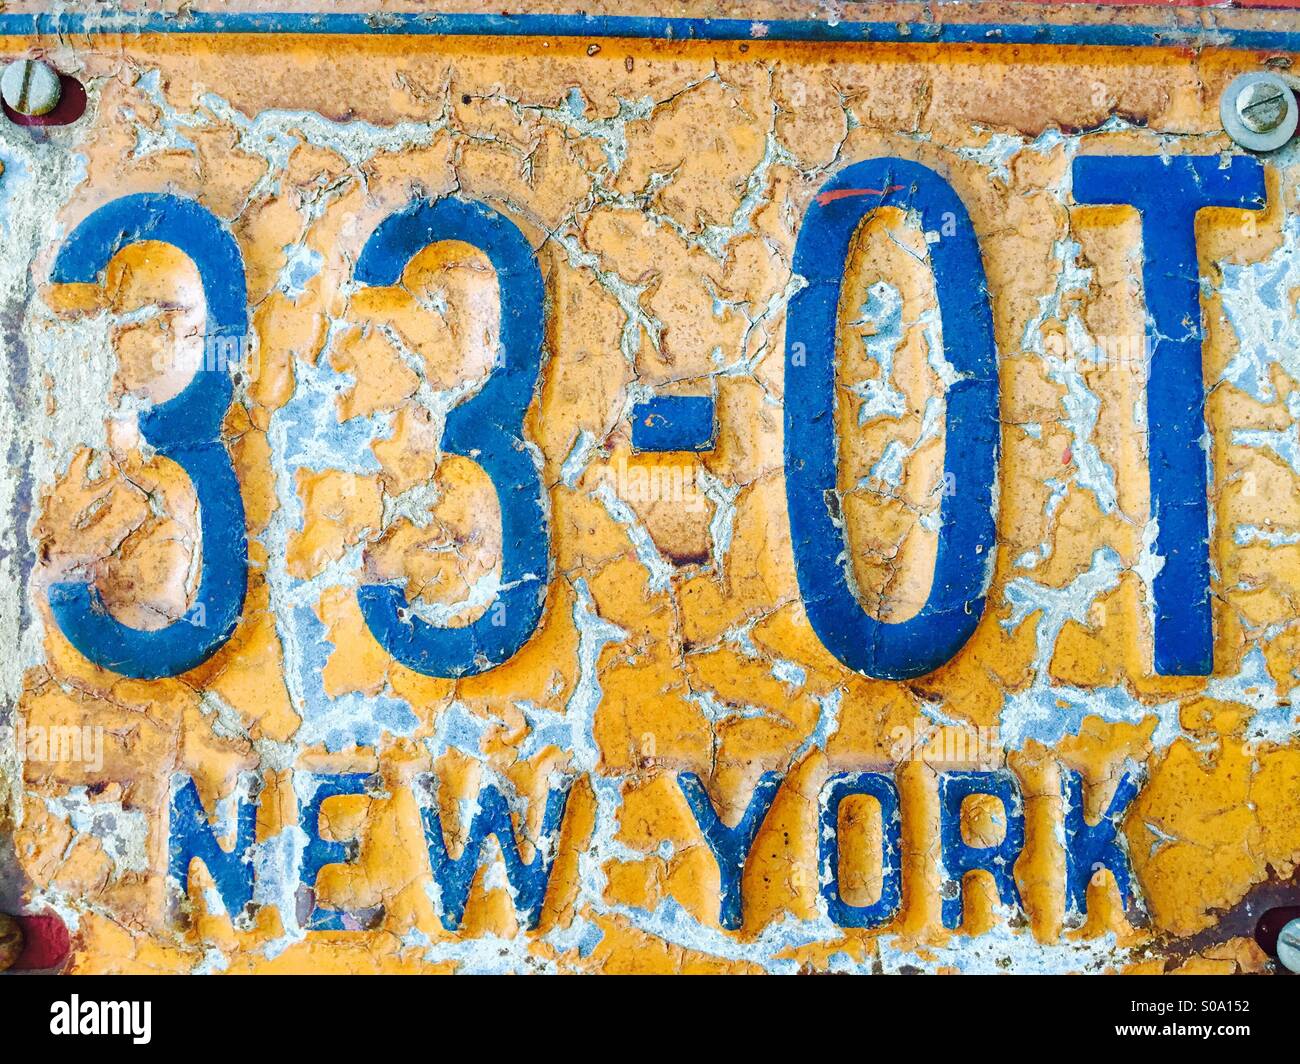 What was the New York License Plate the Year You were Born?